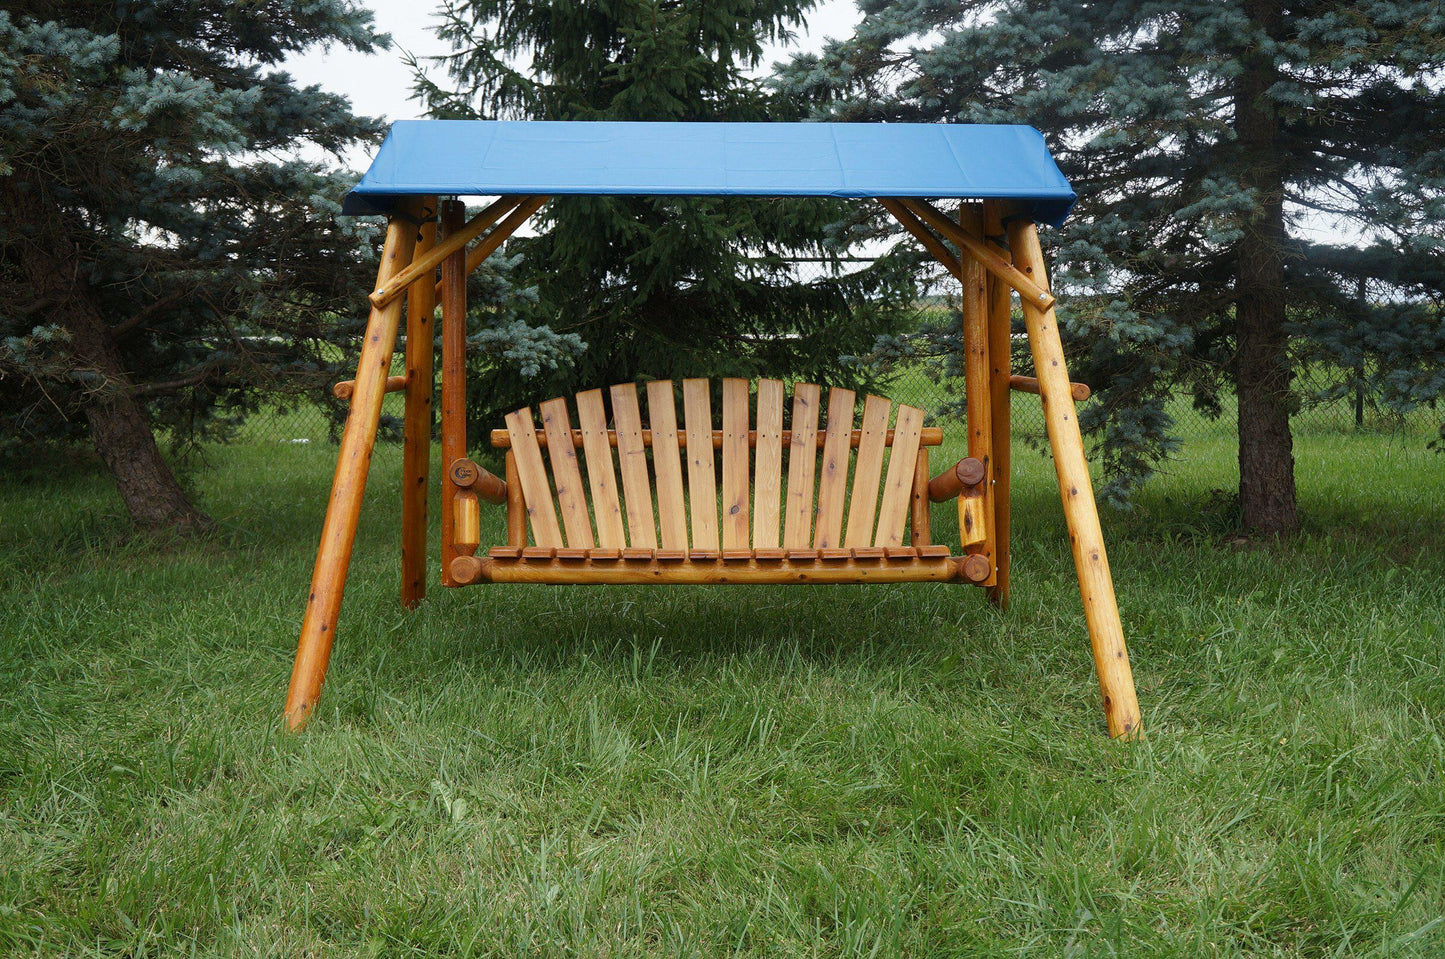 Moon Valley Rustic 5' Swing Canopy Kit (w/hardware) - LEAD TIME TO SHIP 4 WEEKS OR LESS